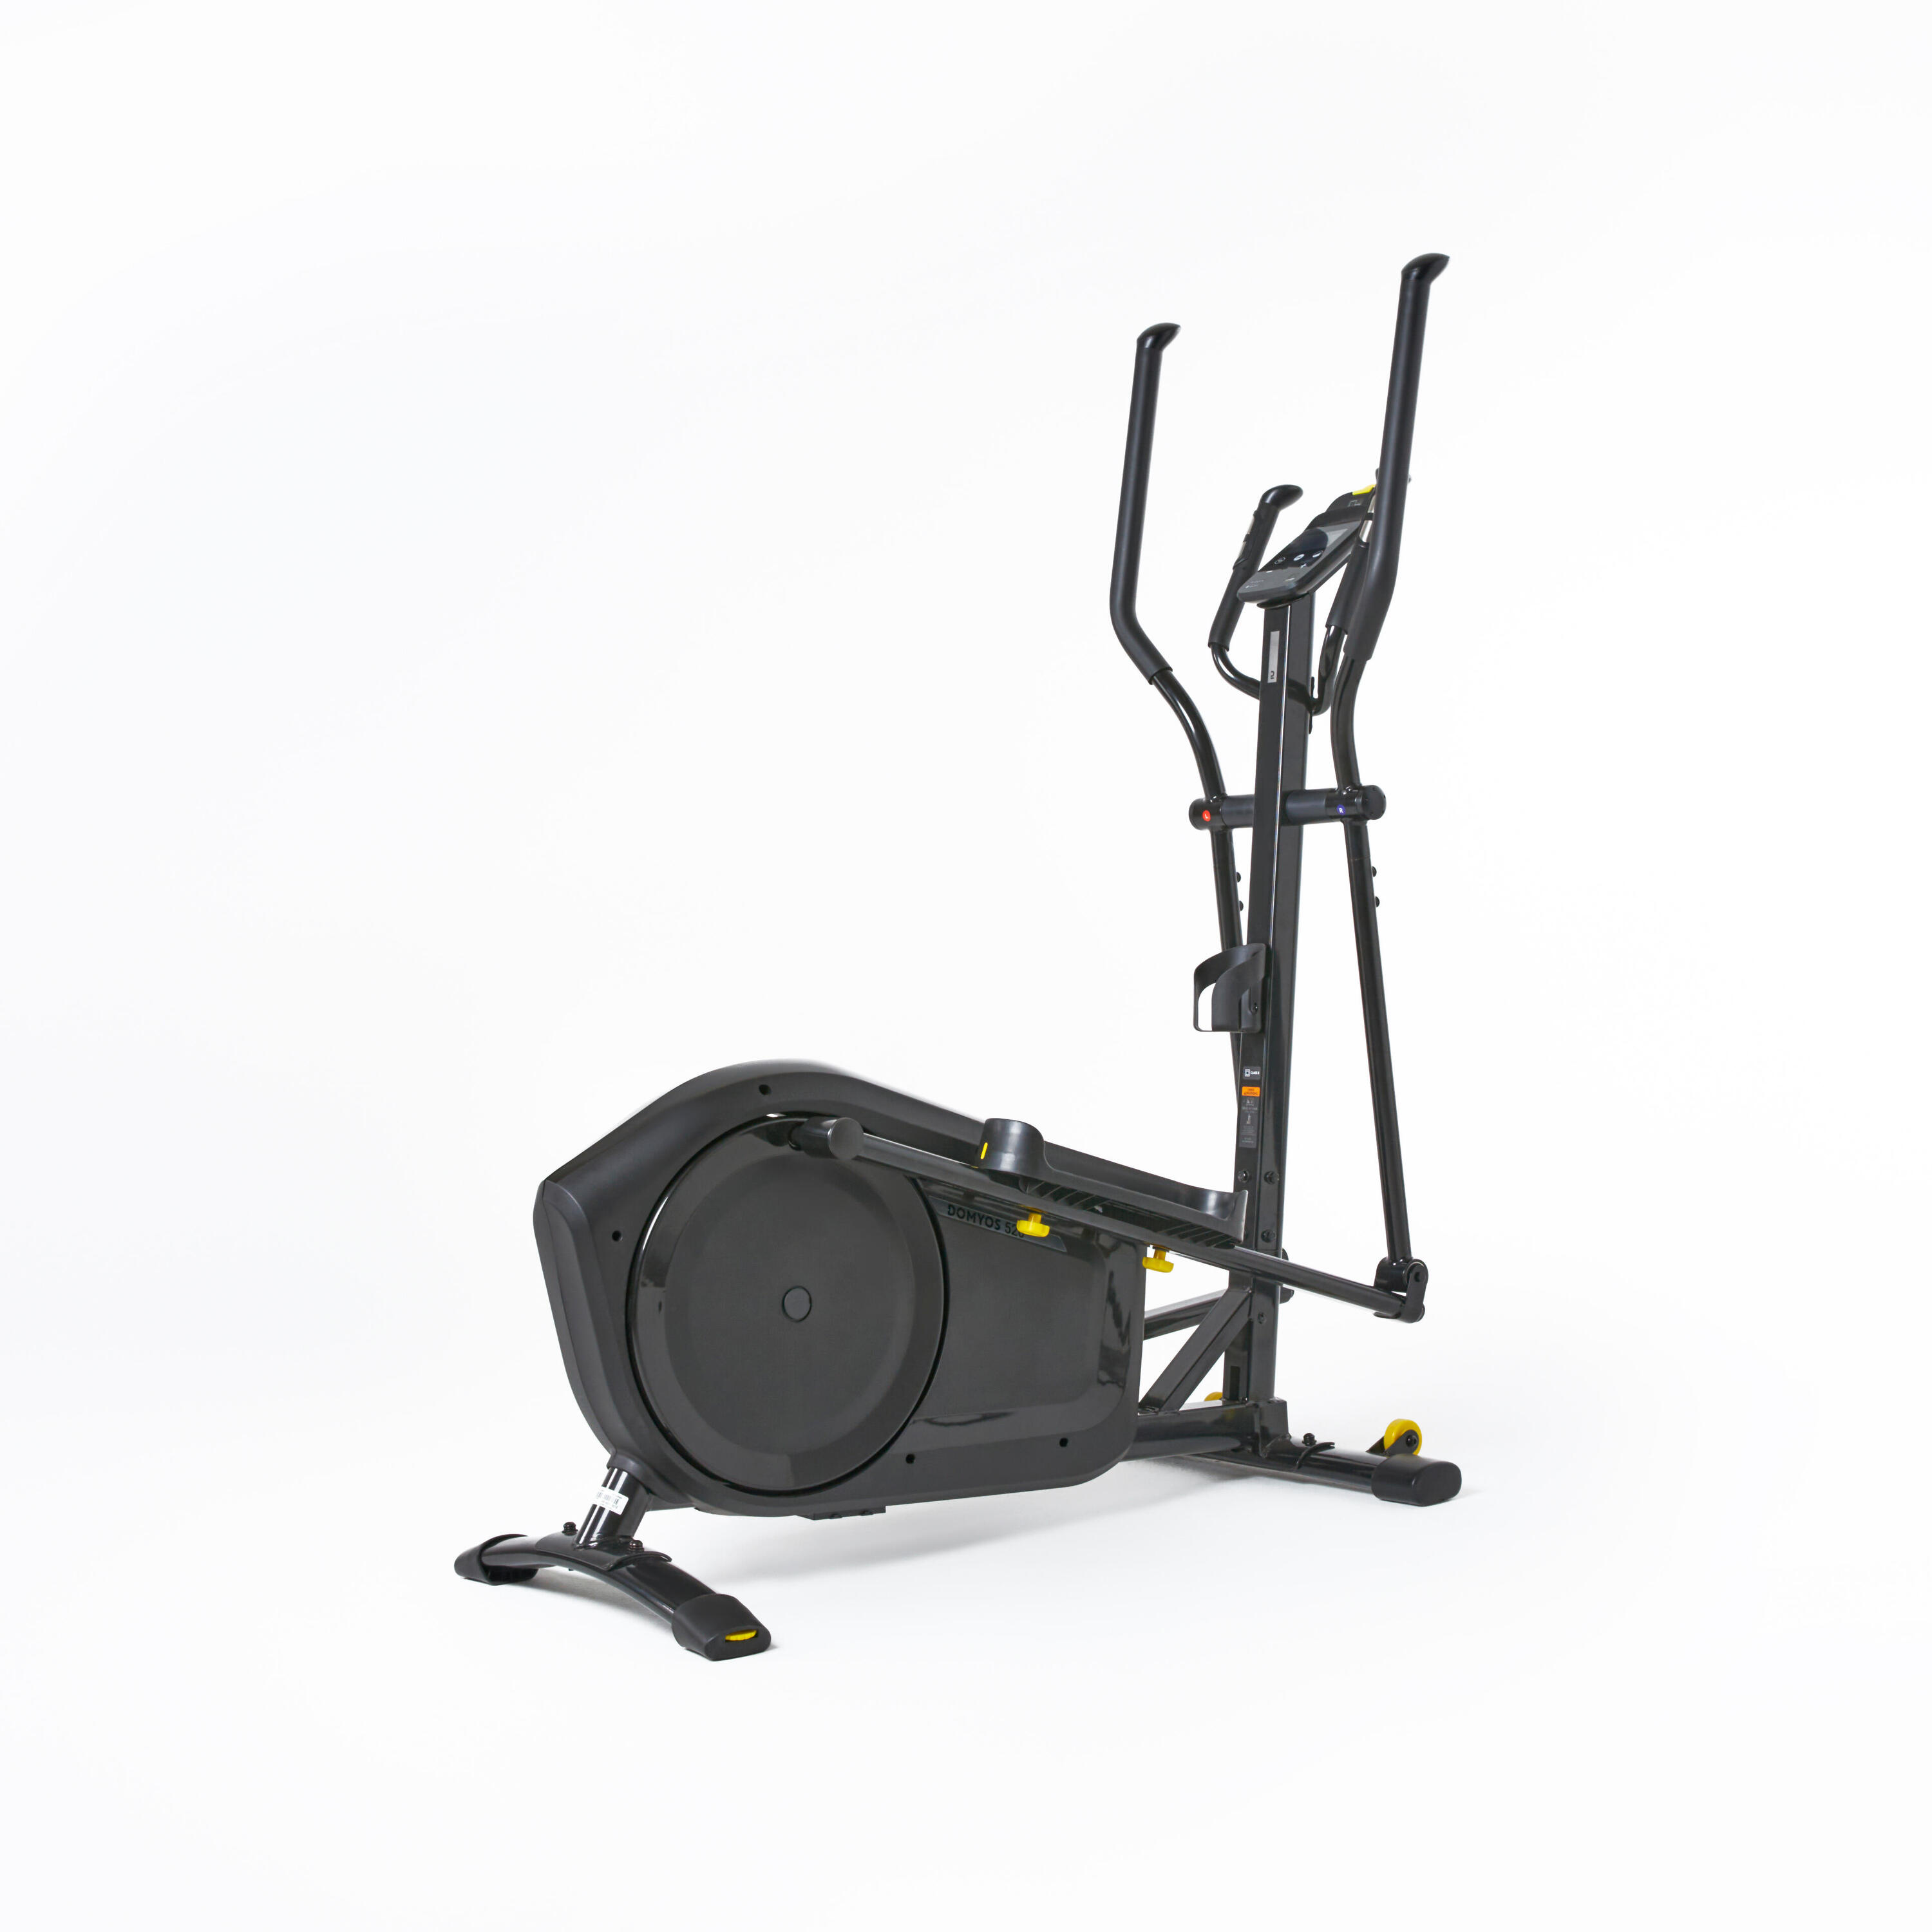 DOMYOS Self-Powered and Connected, E-Connected and Kinomap Cross Trainer EL520B